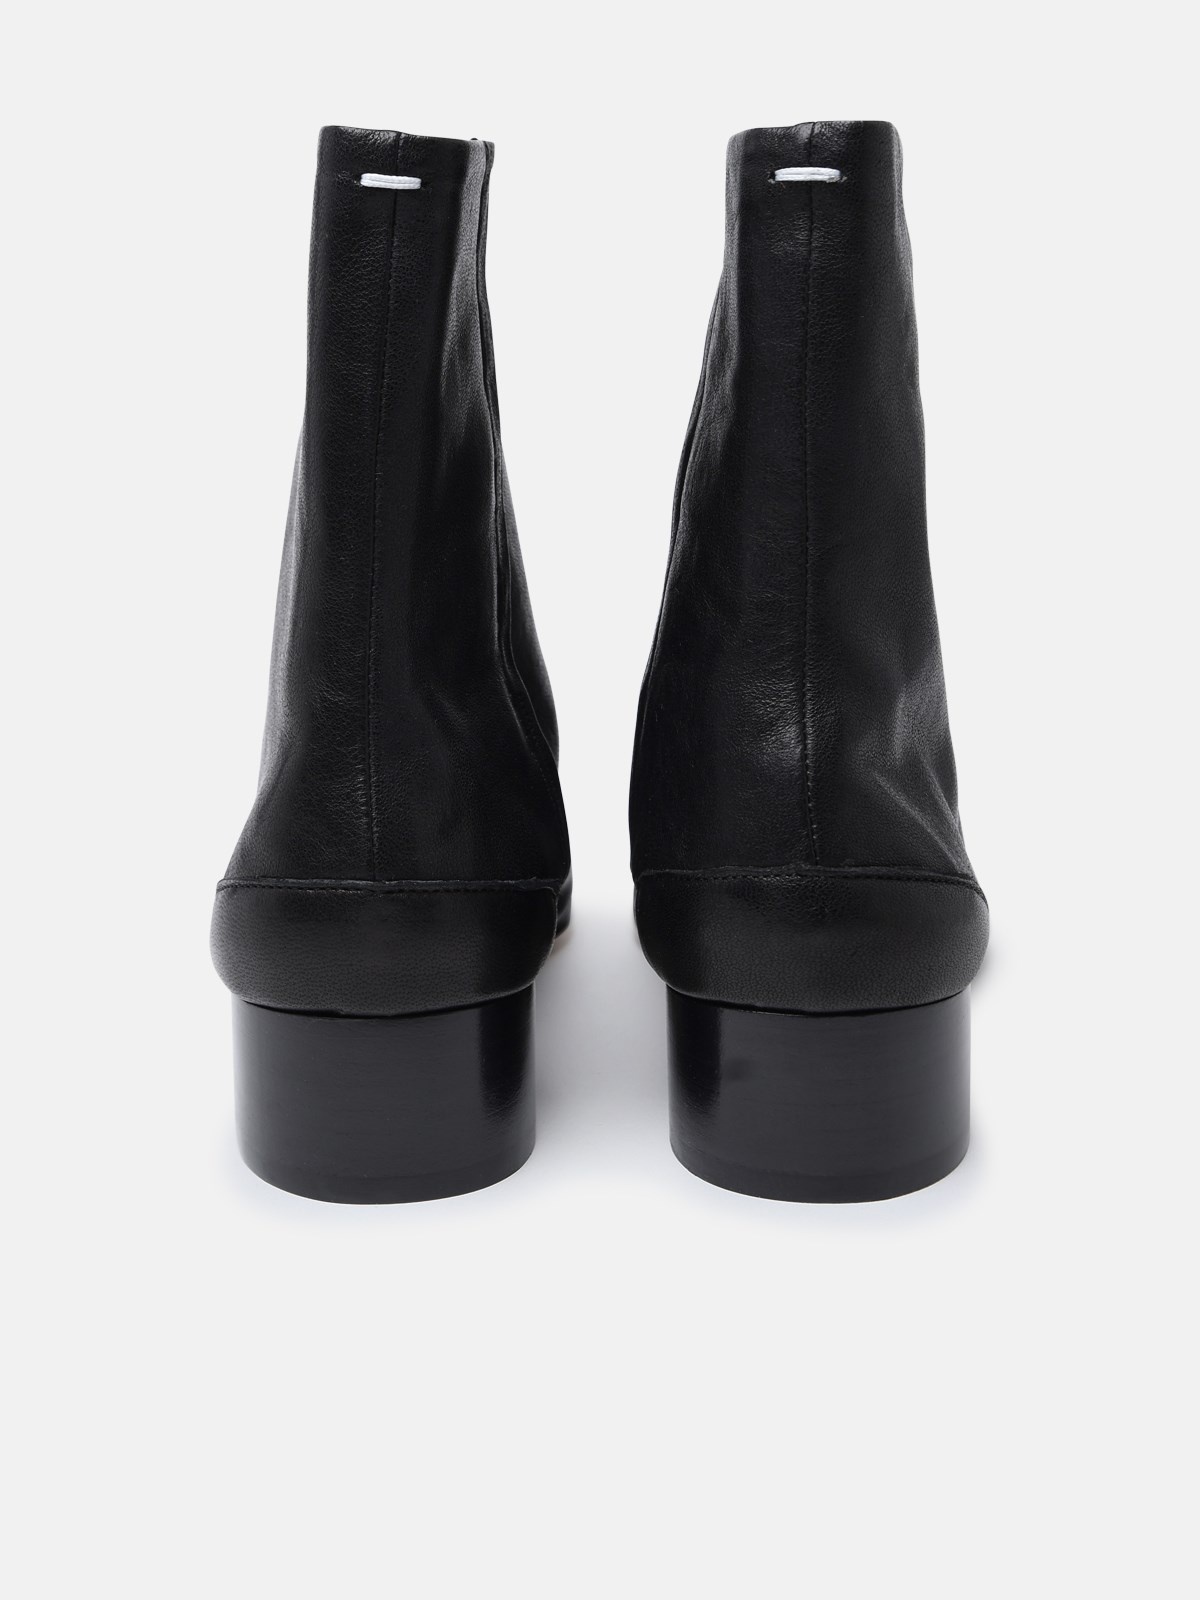 BLACK NAPPA LEATHER ANKLE BOOTS - 4